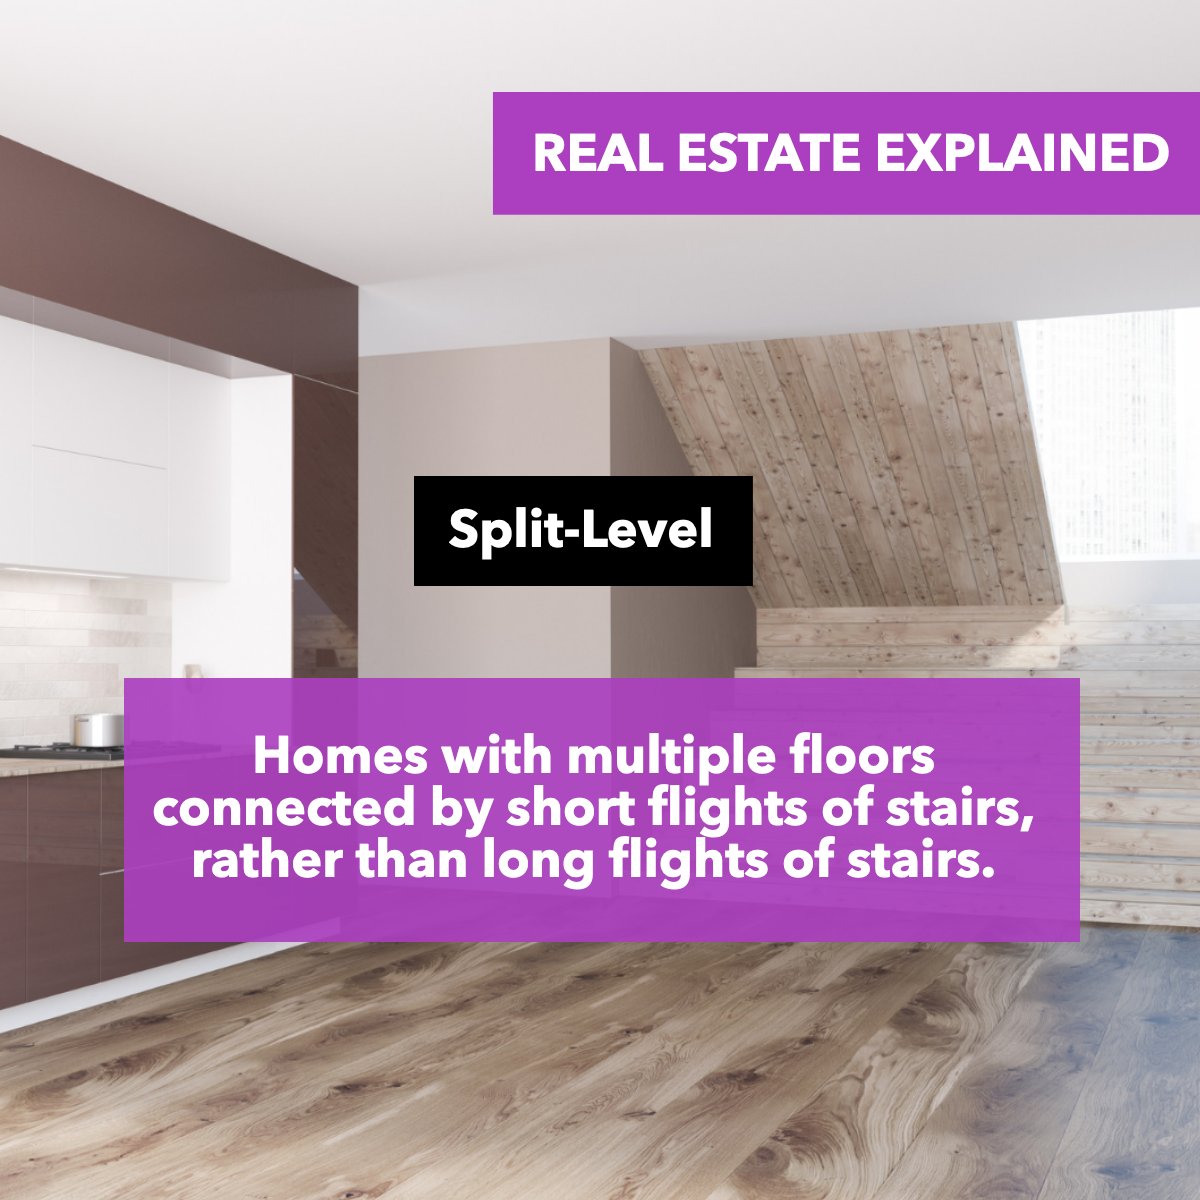 Did you know what a Spit-Level is? 🤔

Is this the type of house that you like?

#splitlevelremodel #splitlevelhome #splitleveldesign
 #hotharfordhomesforsale #findyourdreamhomenow #marylanddreamhomes #realestategoals #sellyourhomewithme #lovewhereyoulive